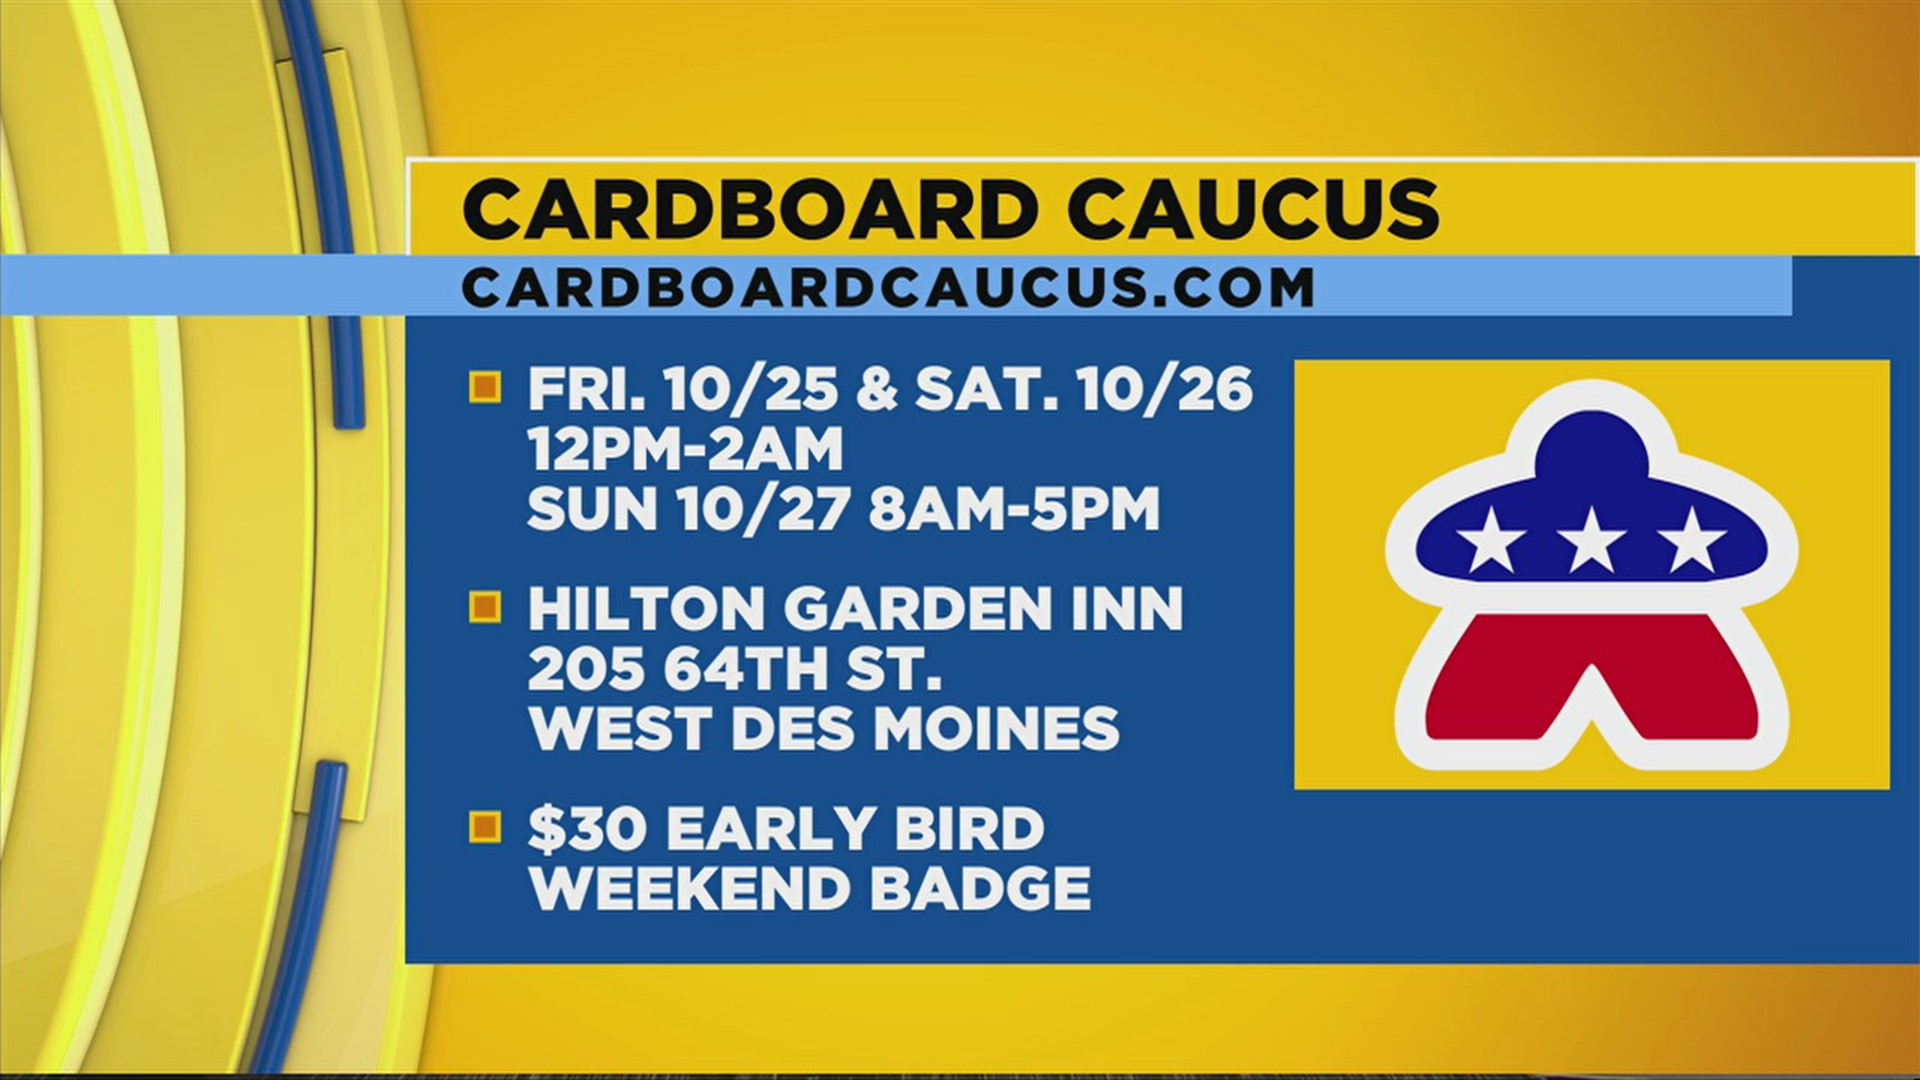 Cardboard Caucus - Board Game Convention